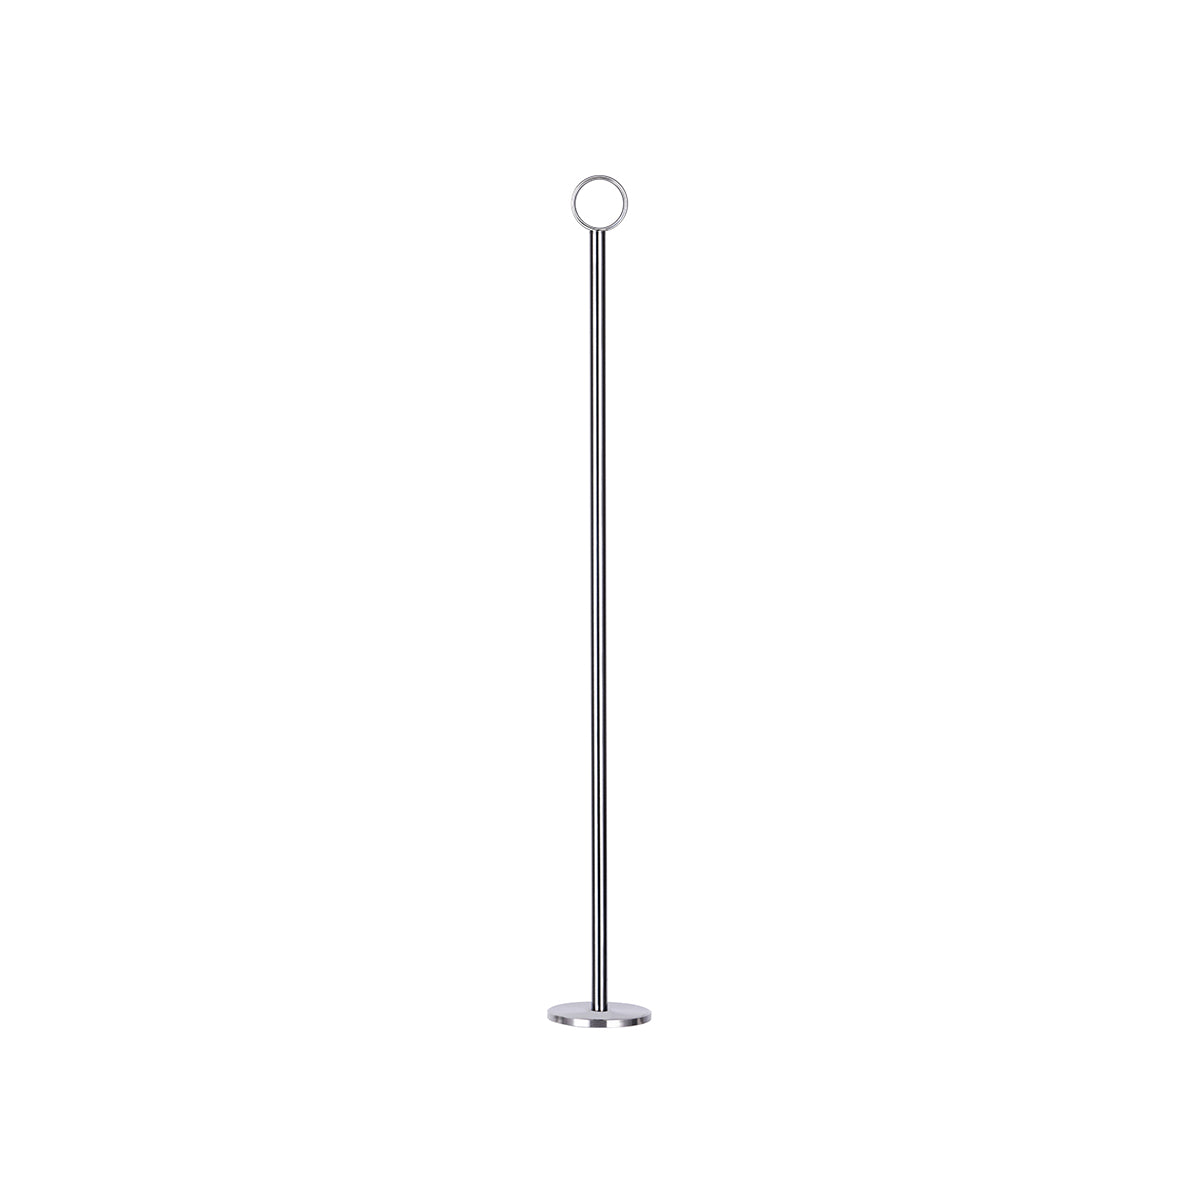 08145 Chef Inox Table Number Stand 450mm Tomkin Australia Hospitality Supplies